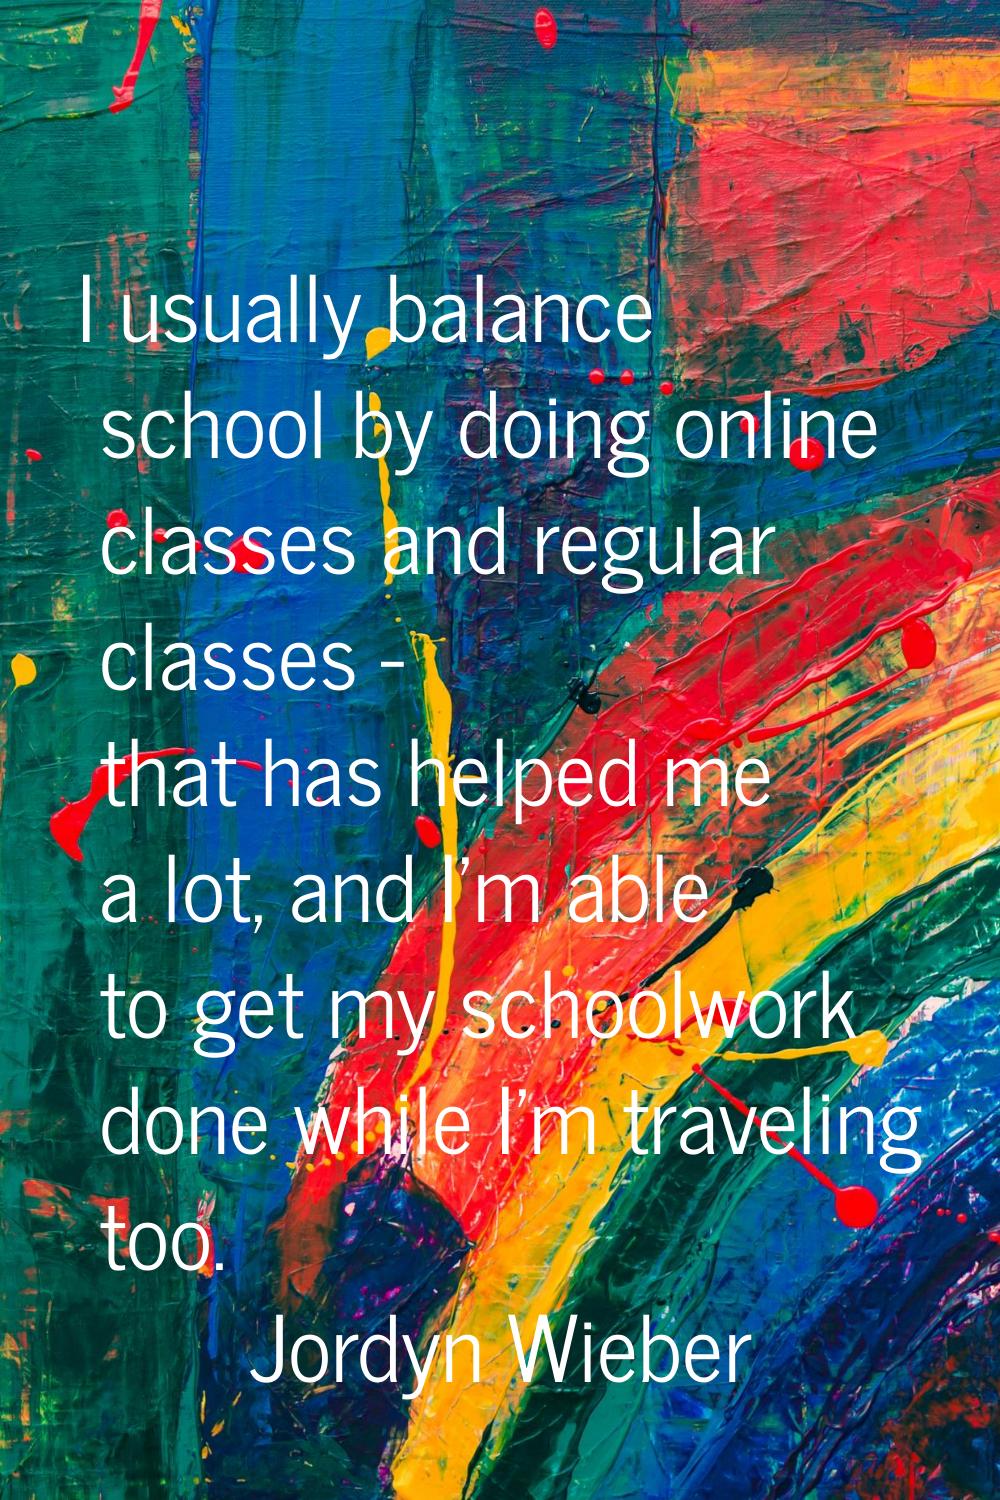 I usually balance school by doing online classes and regular classes - that has helped me a lot, an